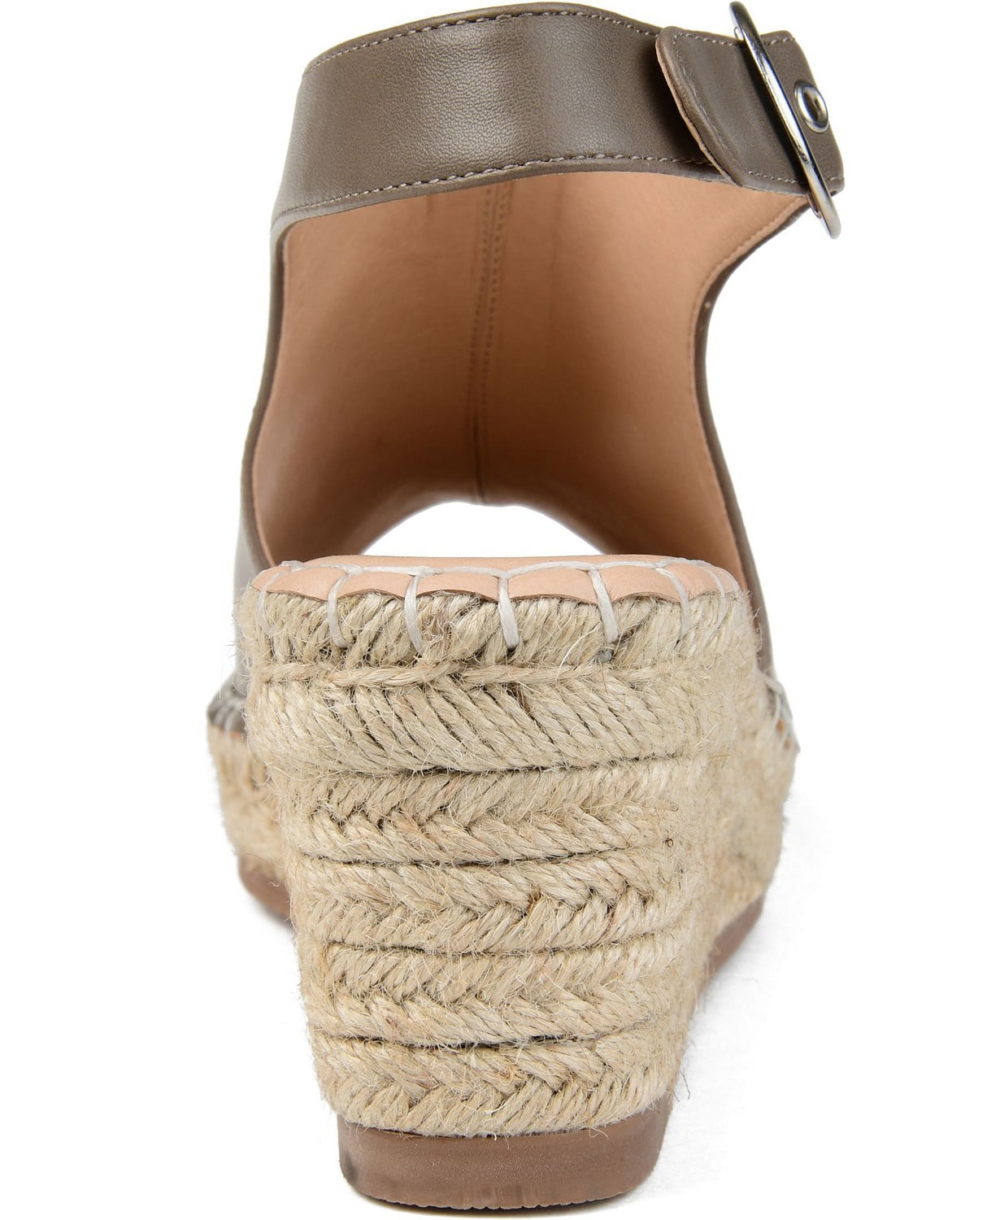 woocommerce-673321-2209615.cloudwaysapps.com-journee-collection-womens-taupe-crew-espadrille-wedges